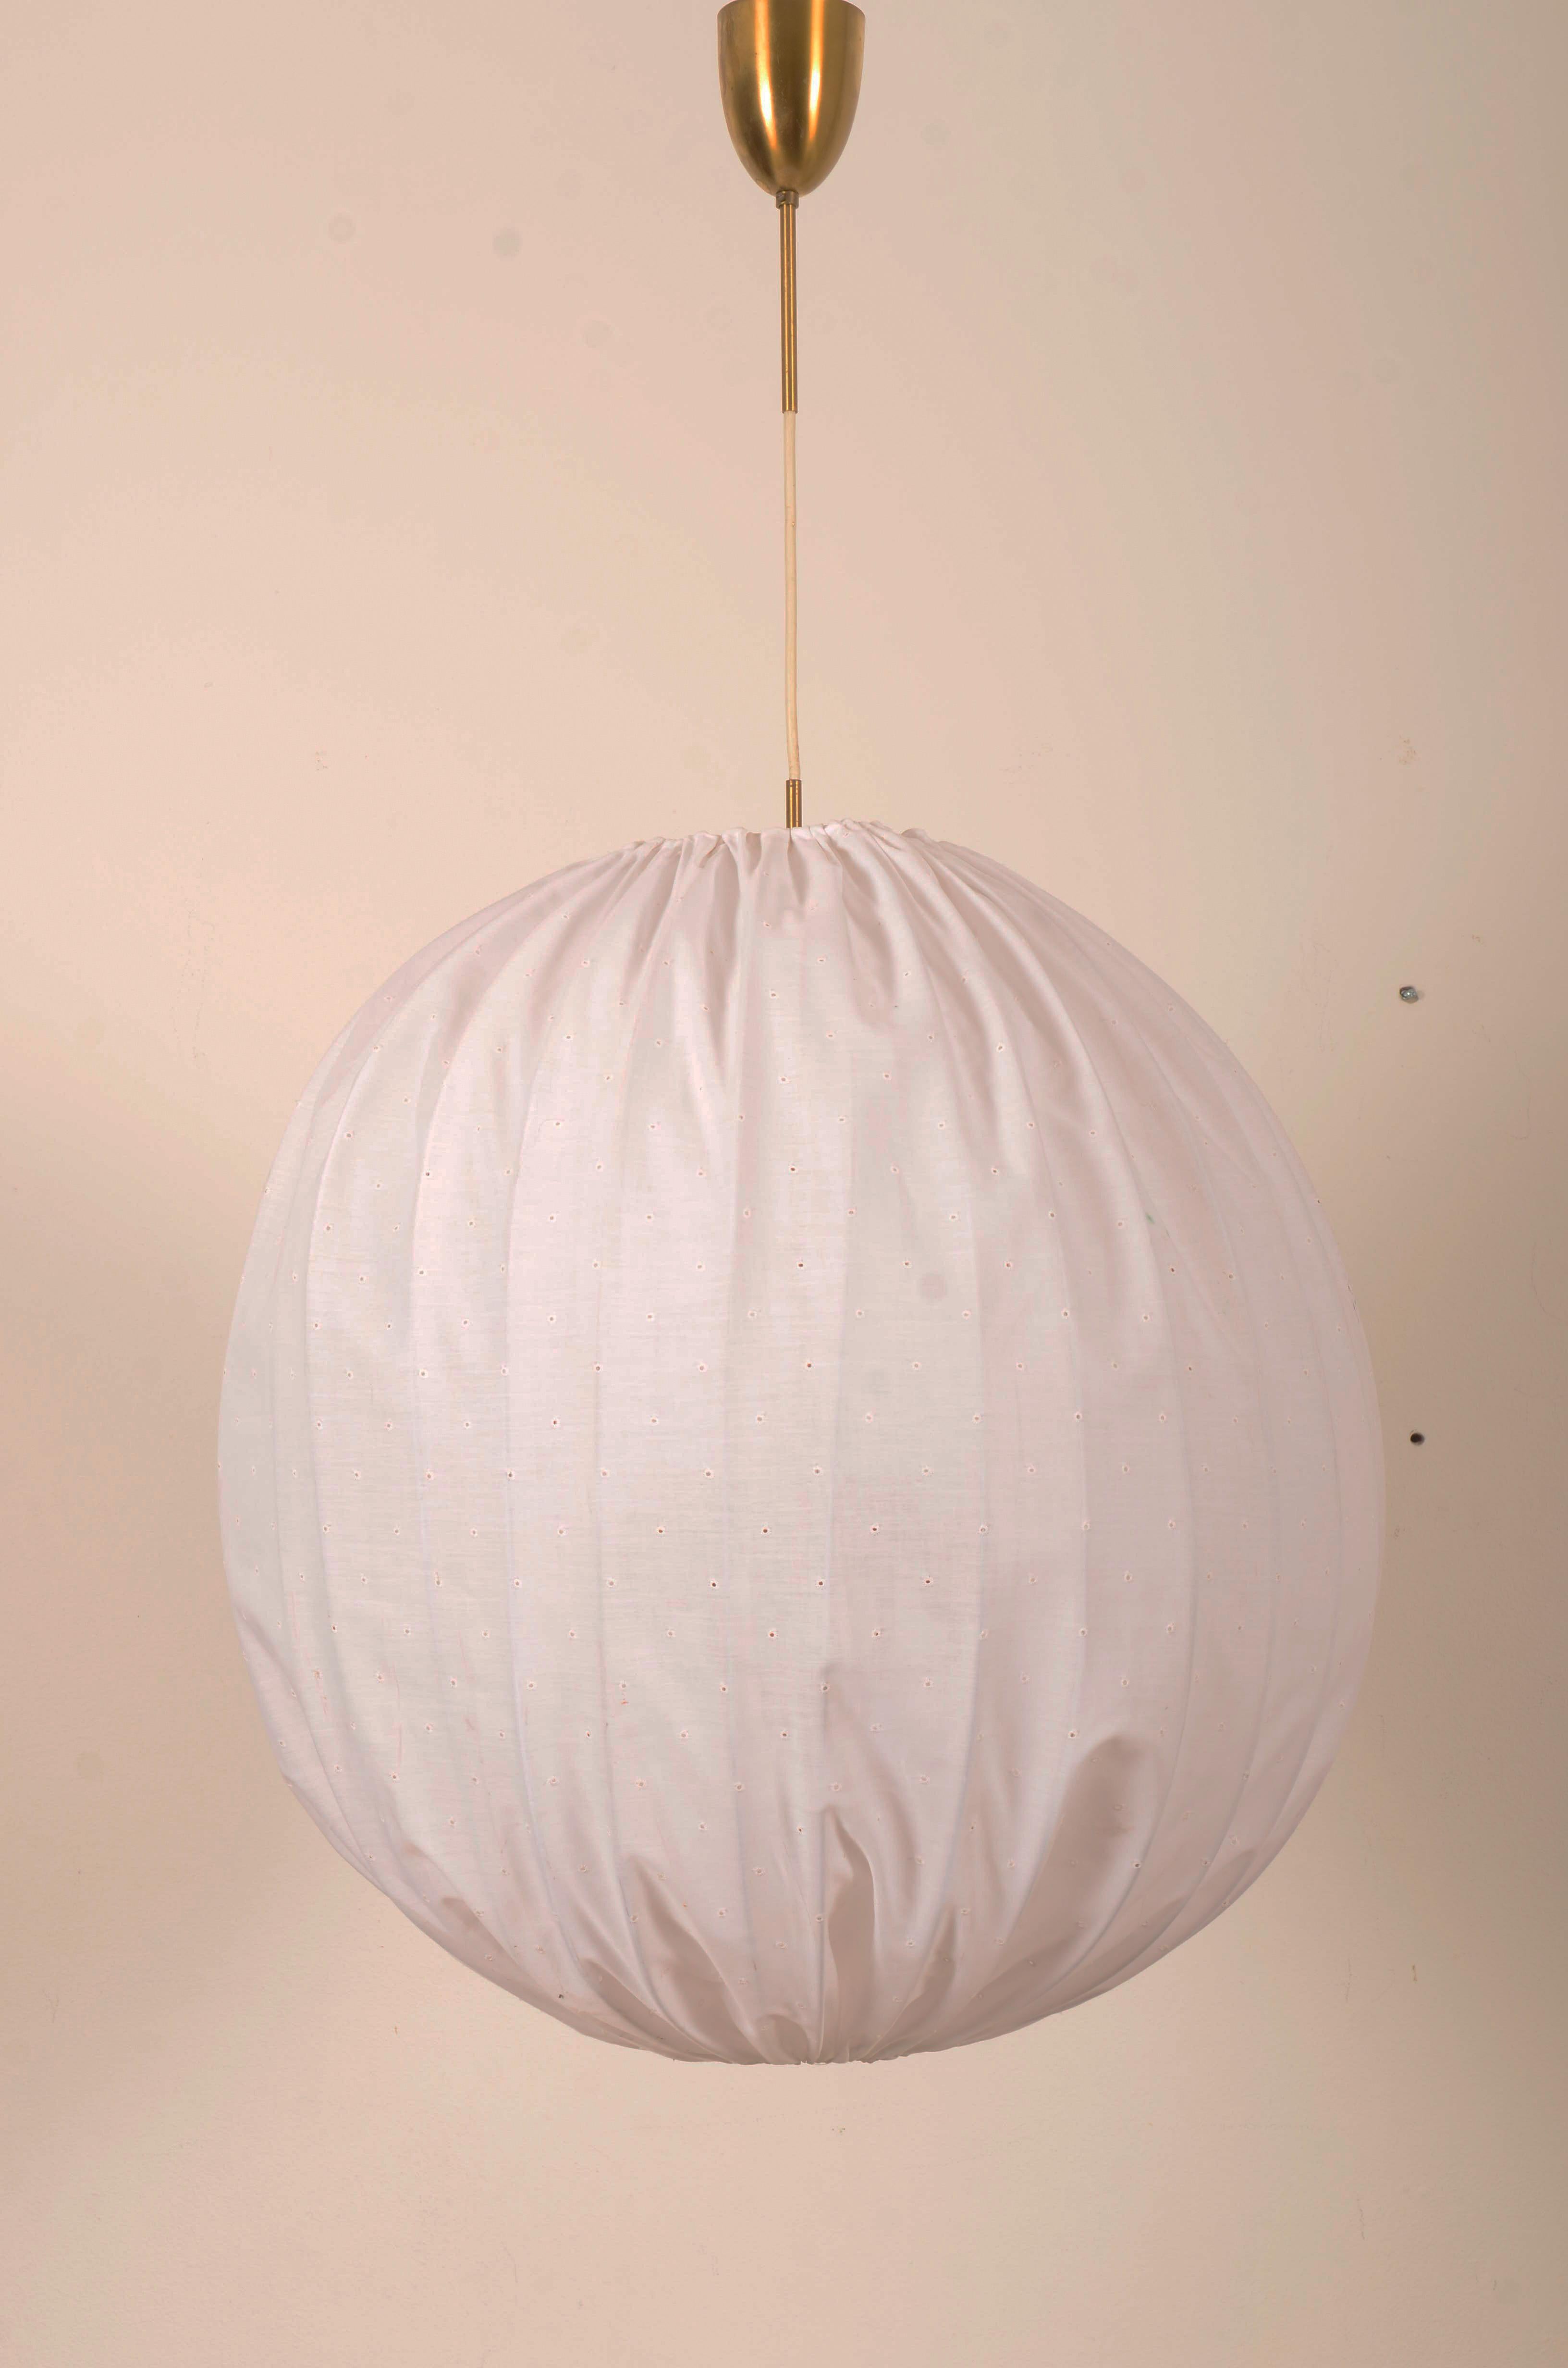 Large Hans-Agne Jakobsson Ceiling Pendant In Good Condition For Sale In Vienna, AT